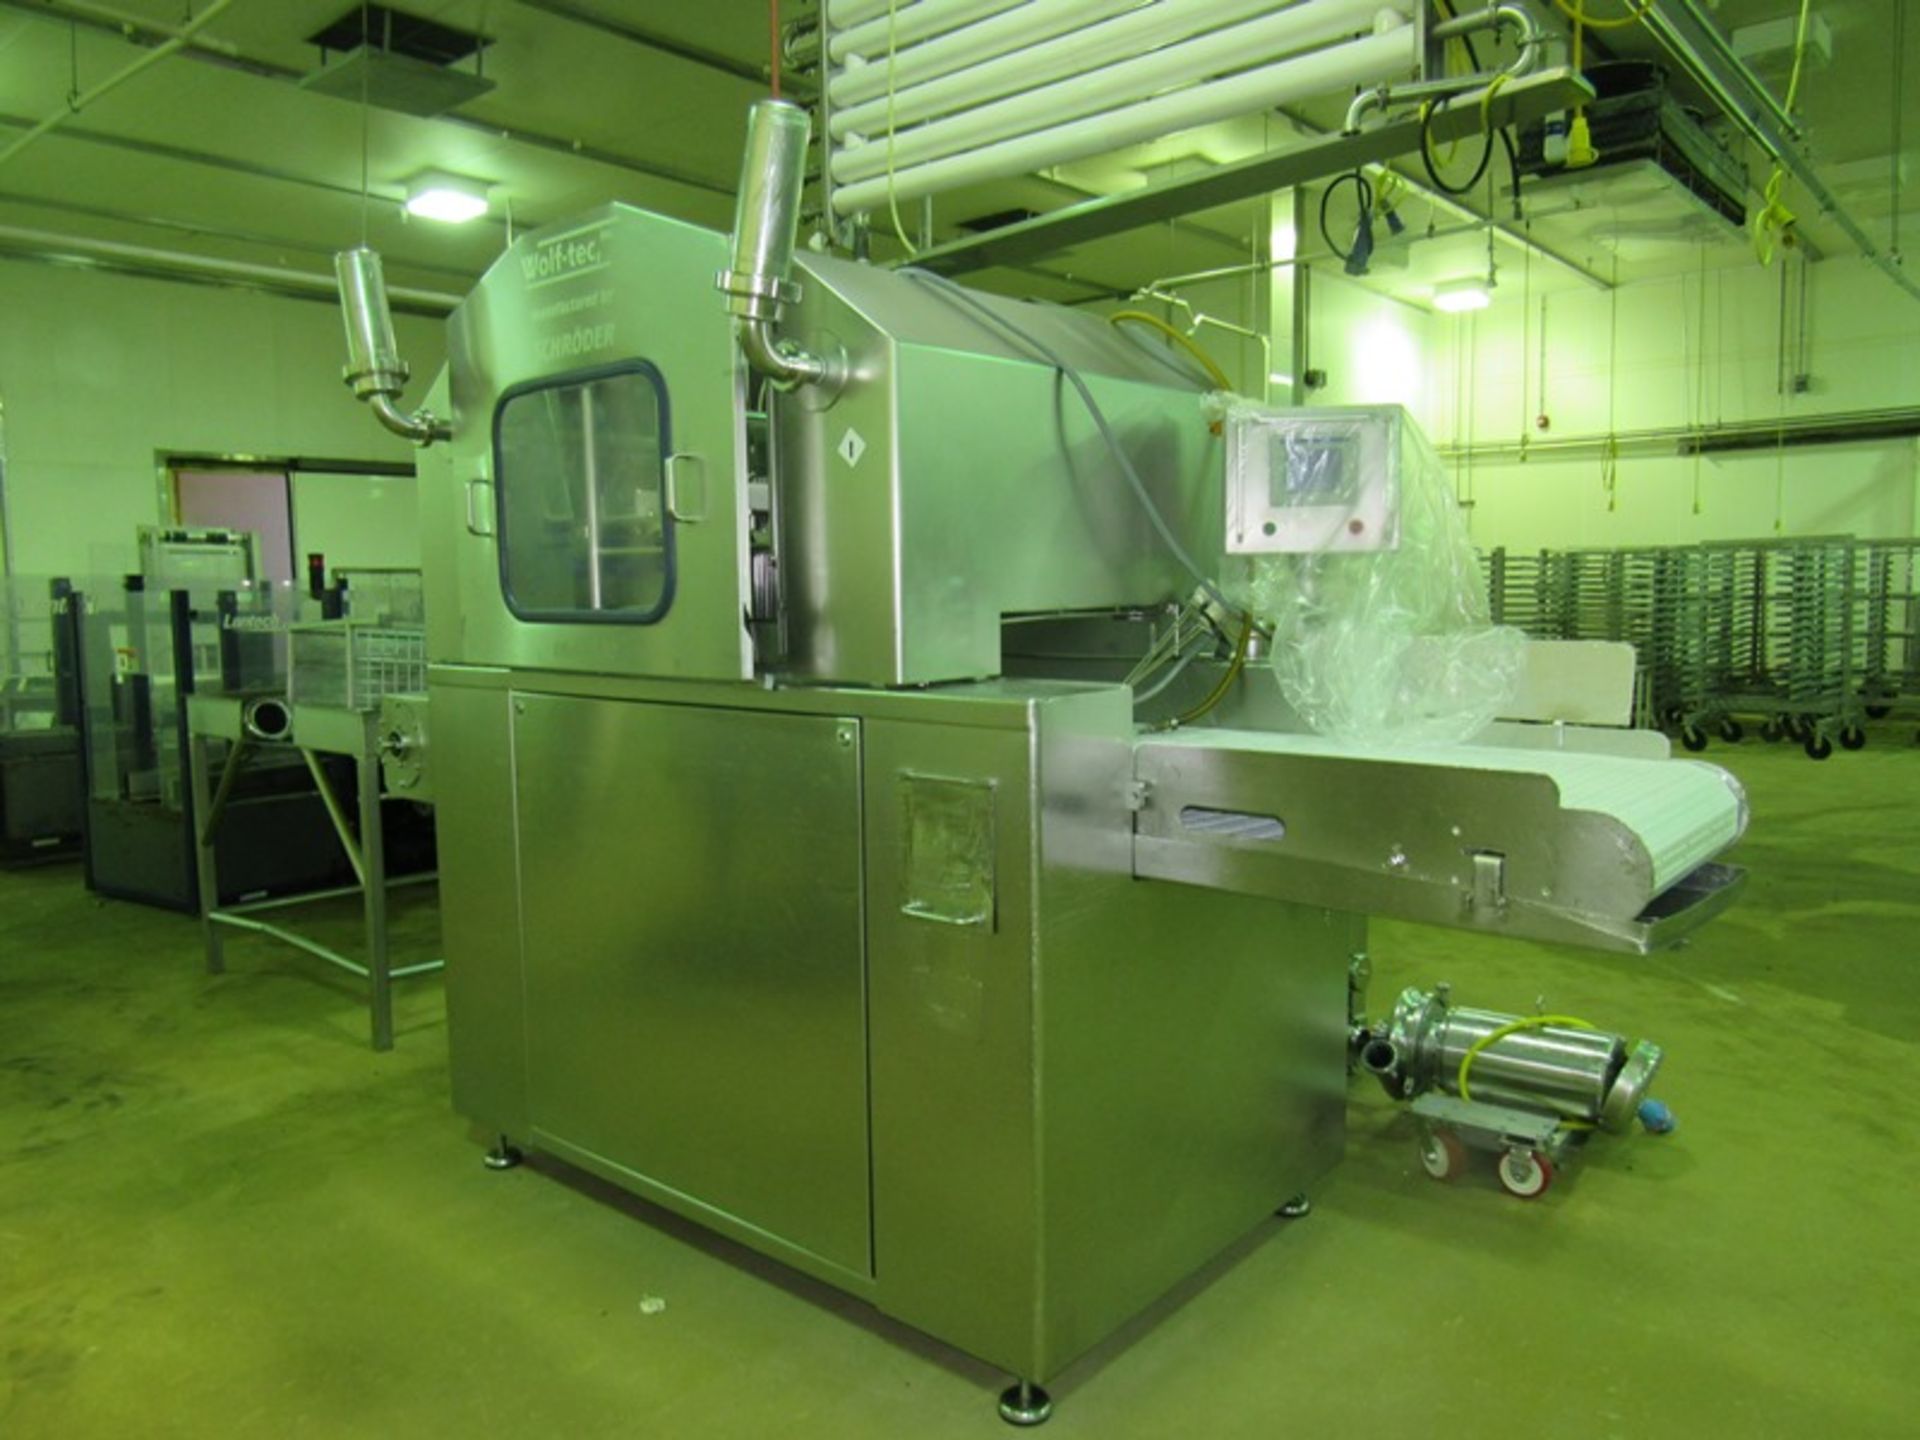 Schroeder Mdl. IMAX630 Wolftec Injector, double head, 273 needles head, 24" W X 10' L intralox - Image 2 of 32